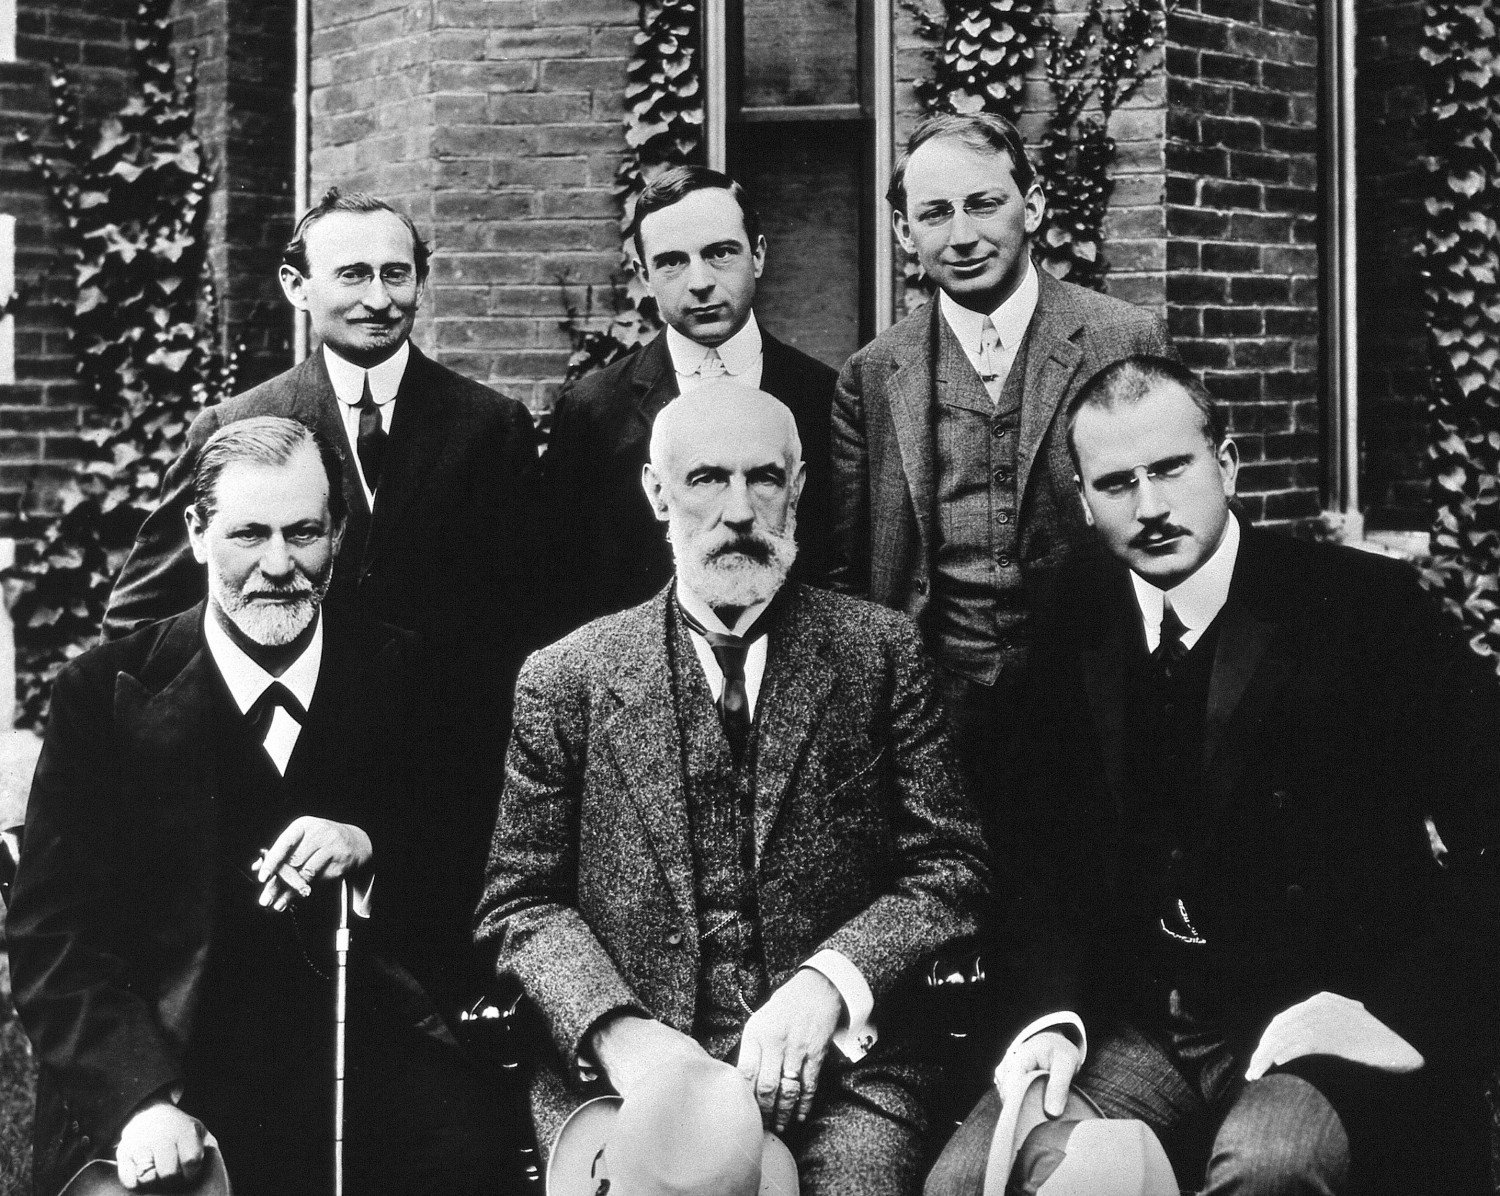 Group photo 1909 in front of Clark University. Front row: Sigmund Freud, G. Stanley Hall, Carl Jung; back row: Abraham A. Brill, Ernest Jones, Sandor Ferenczi